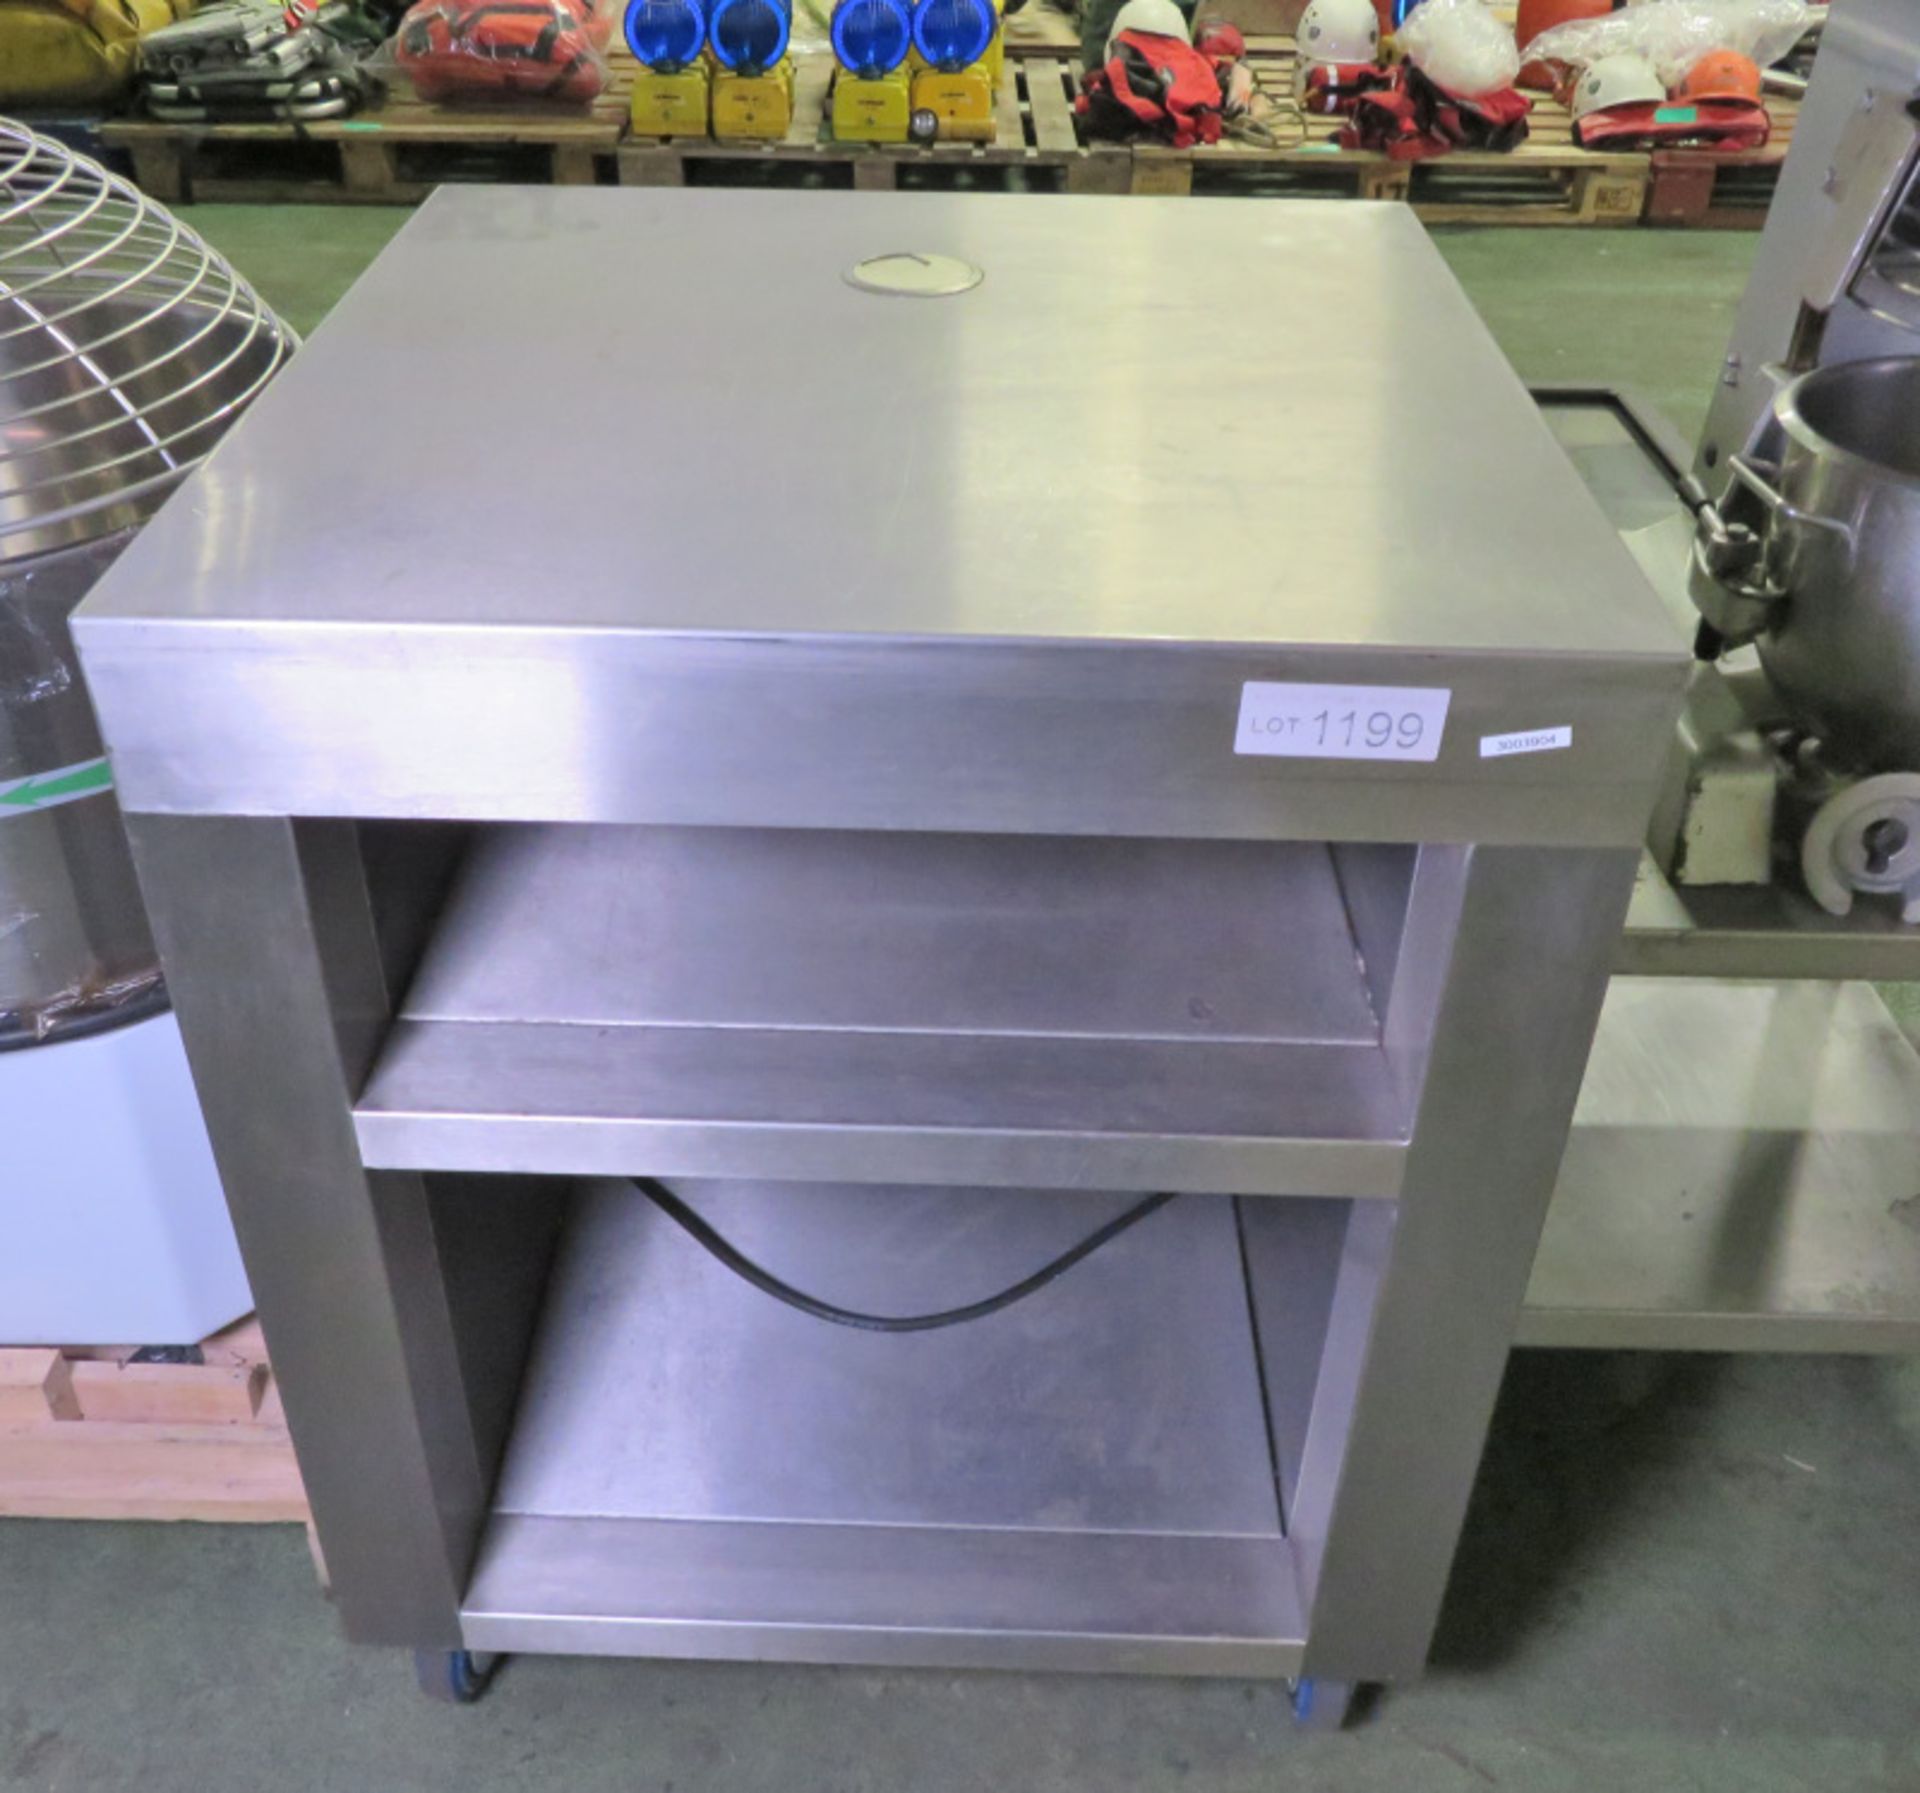 Stainless Steel Mobile Counter L 700mm x W 700mm x H 900mm